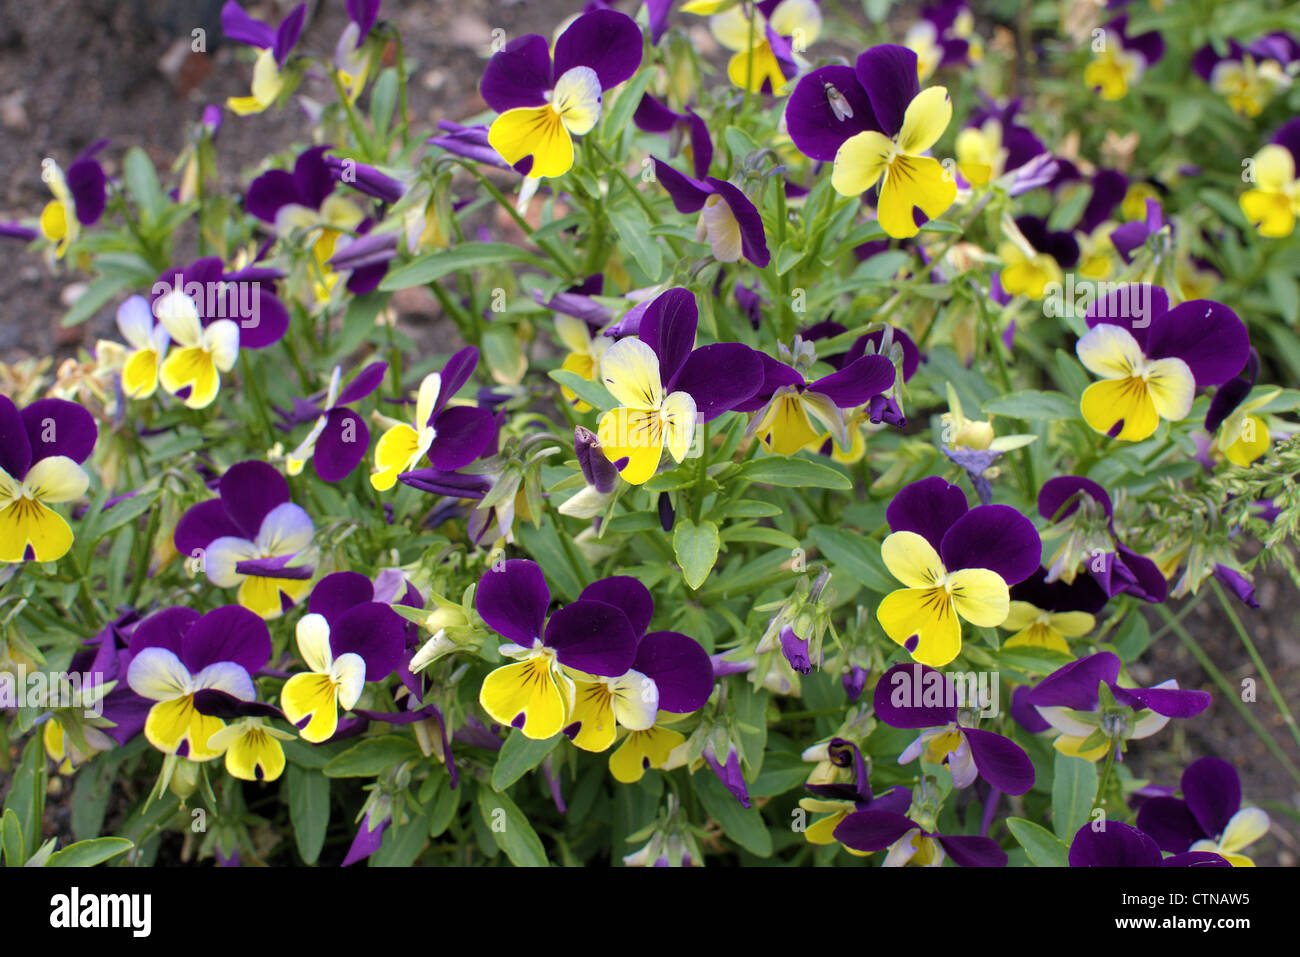 Yellow violet pansies pansy Viola tricolor Stock Photo